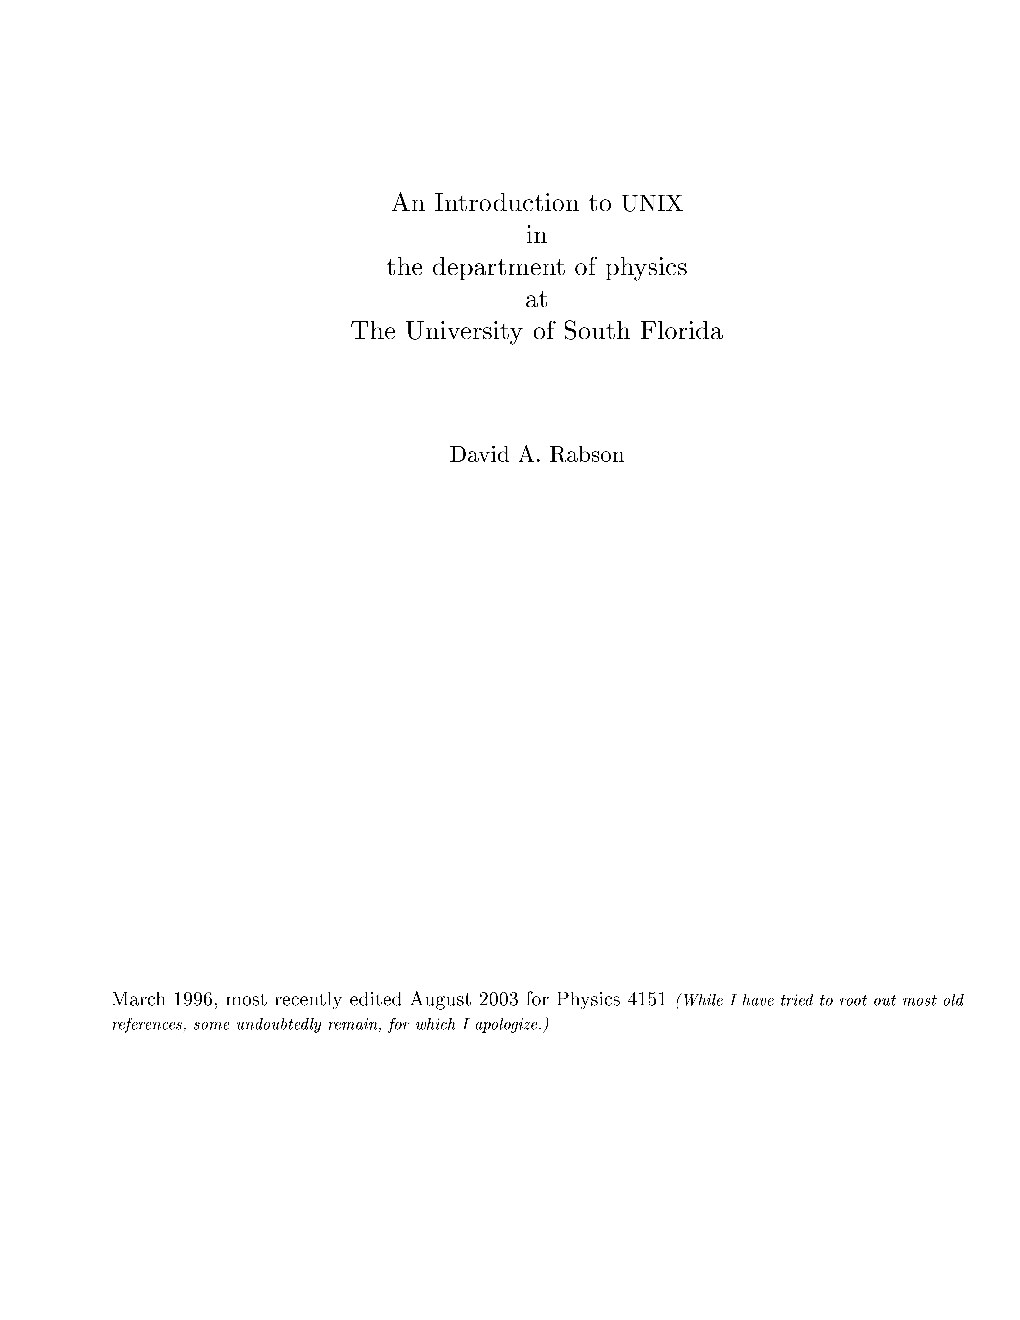 An Introduction to UNIX in the Department of Physics at The